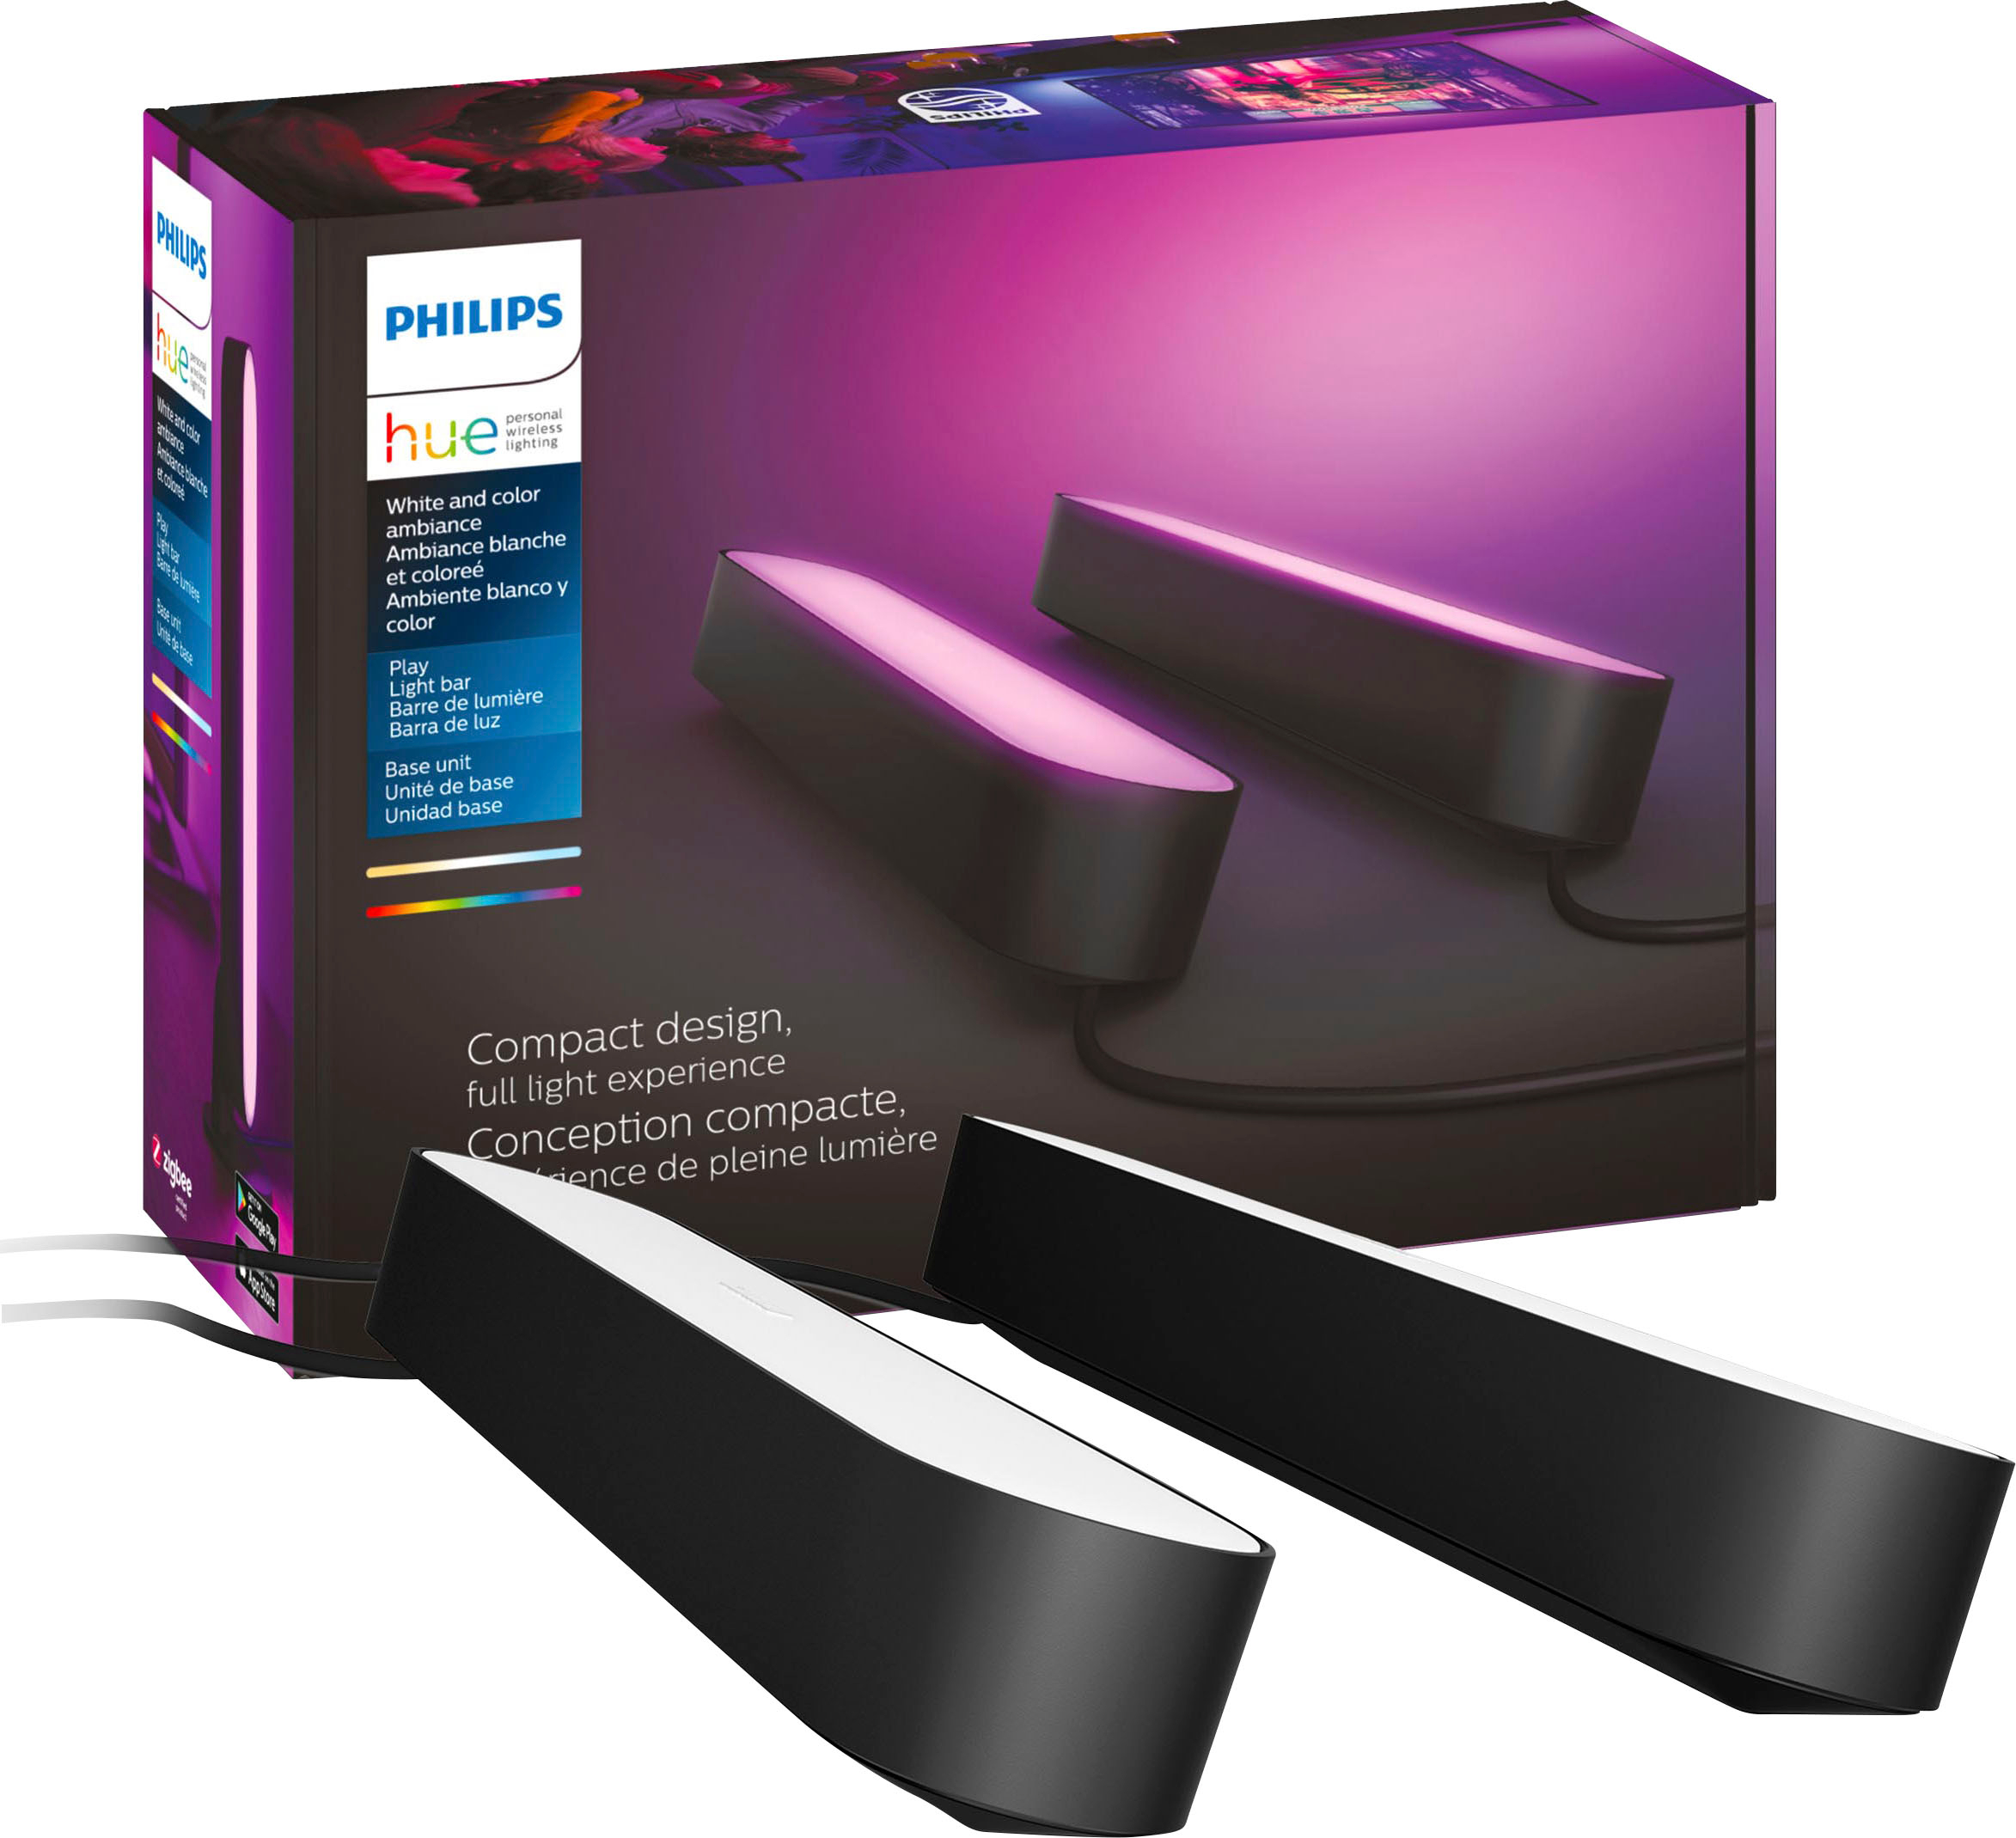 Philips Hue Play LED Bar Light (2-Pack) White and Color Ambiance - Best Buy